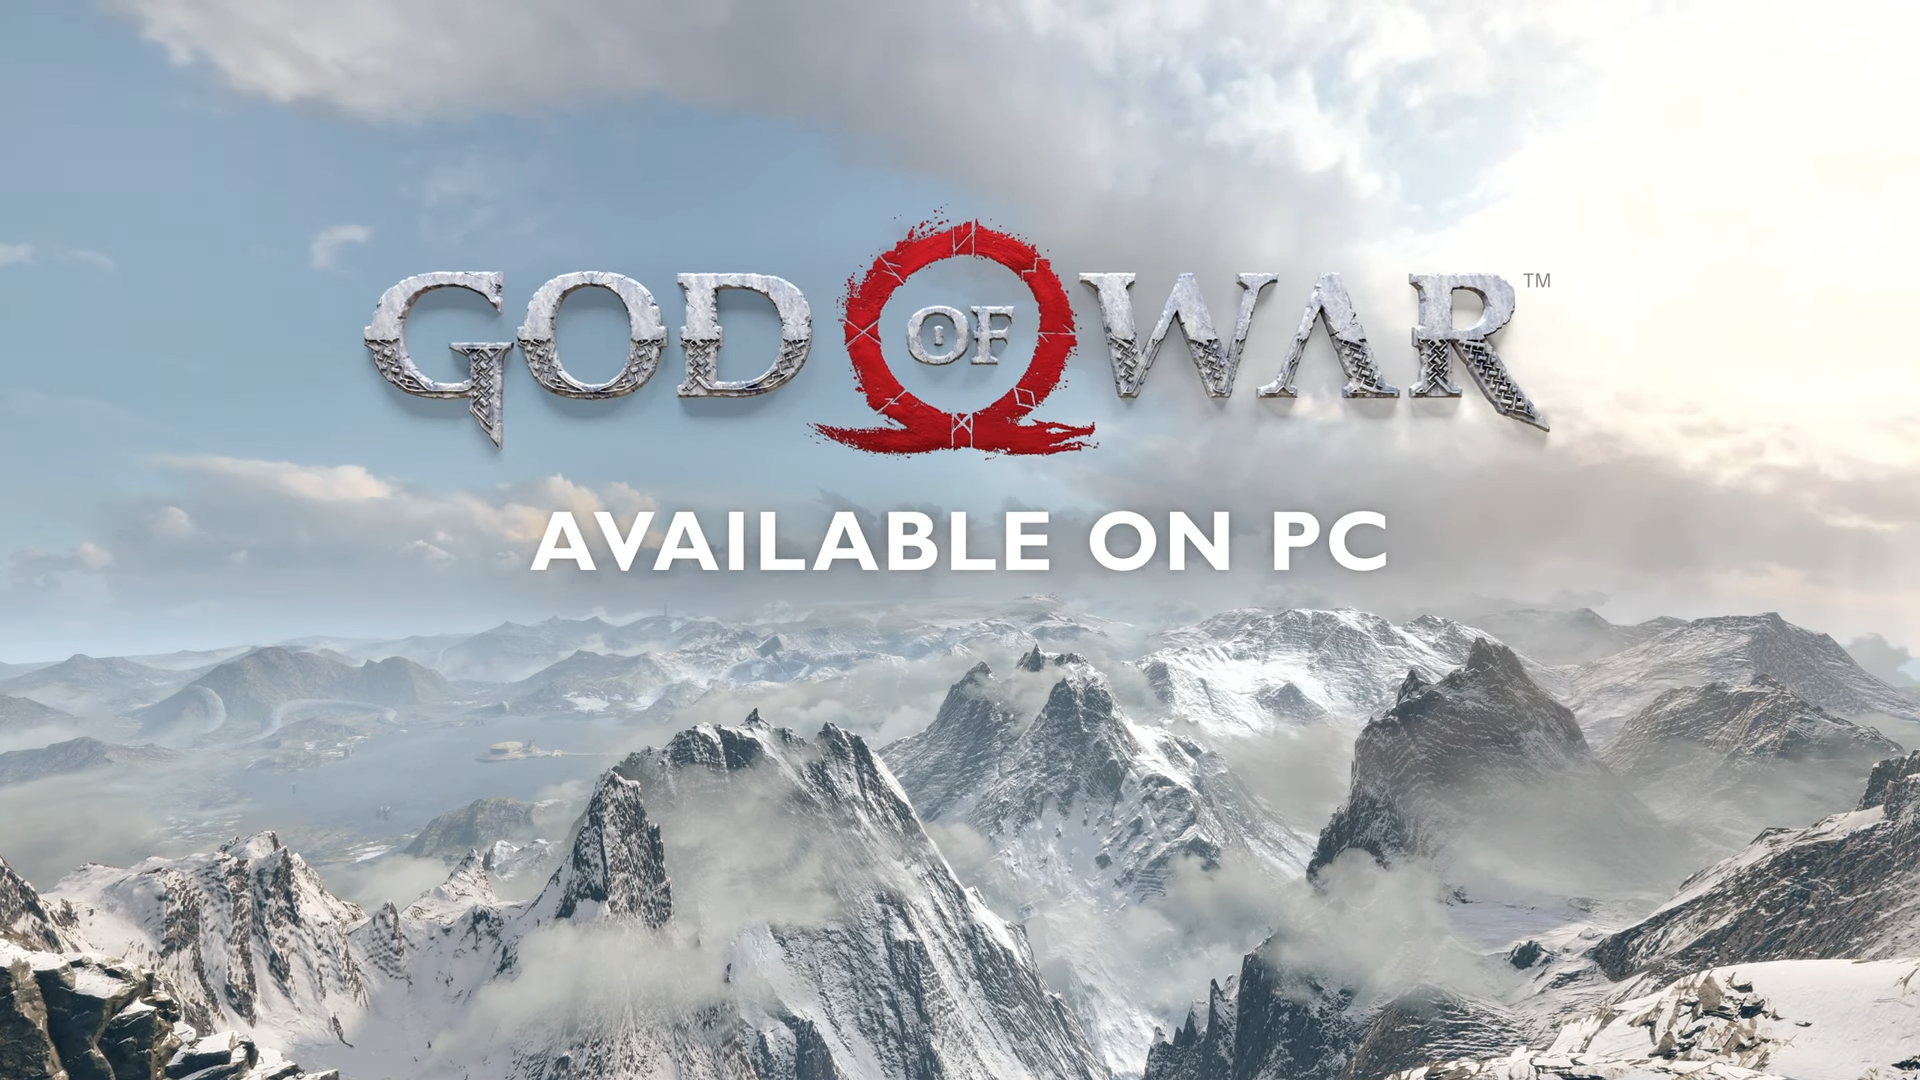 God of War PC features trailer and system requirements released